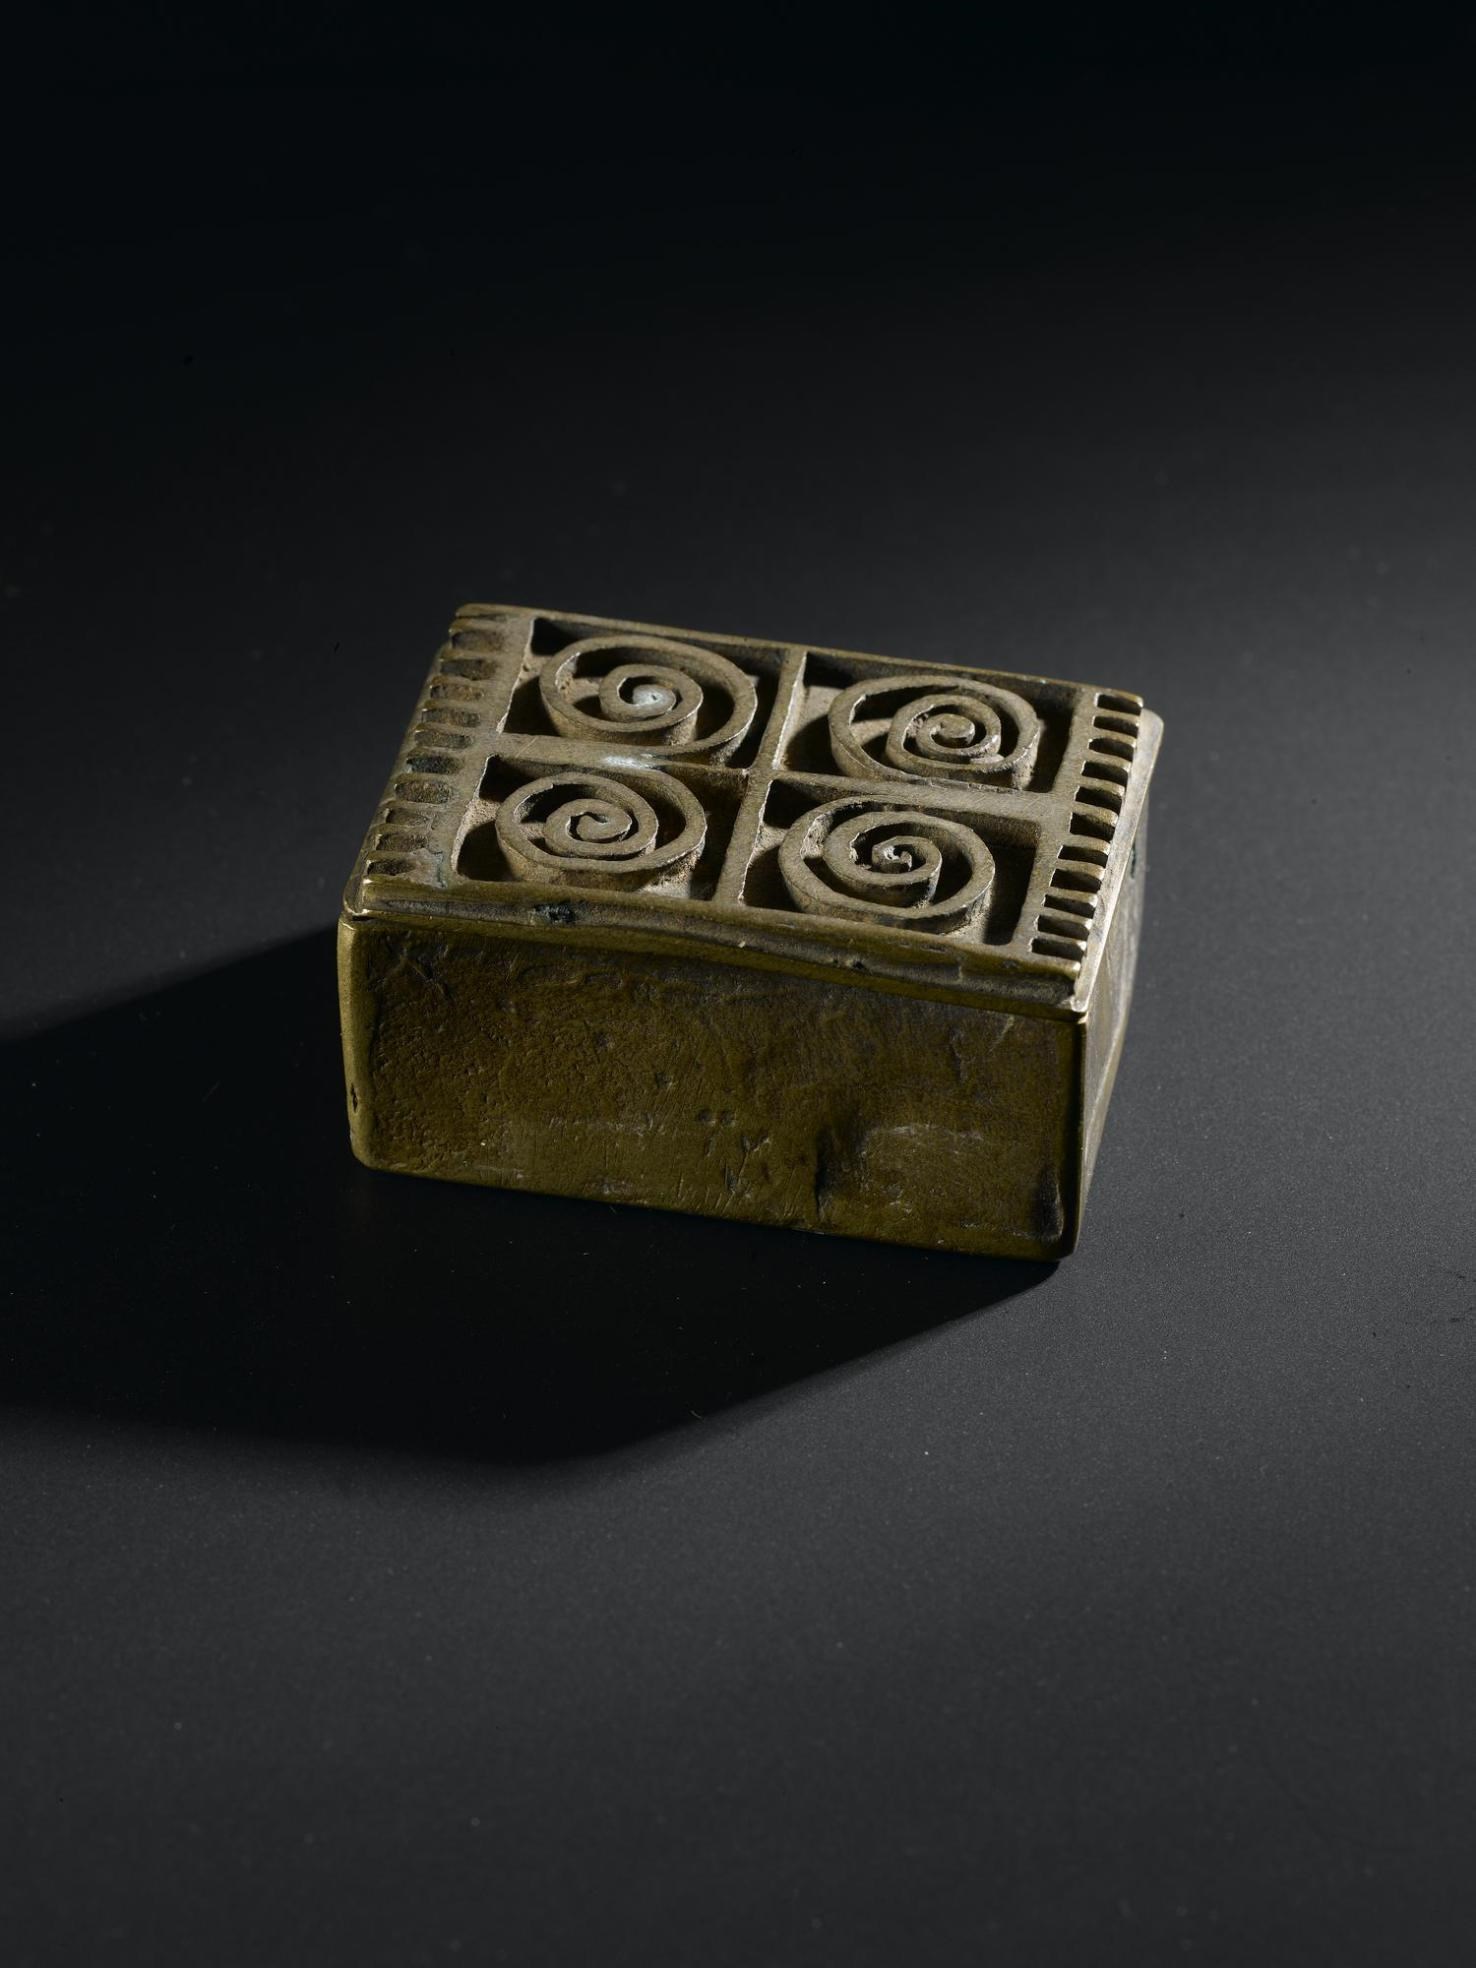 Brass box for holding gold-dust, rectangular with lid decorated with relief scrolls, produced by lost-wax casting: West Africa, Ghana, Asante, late 19th to early 20th century